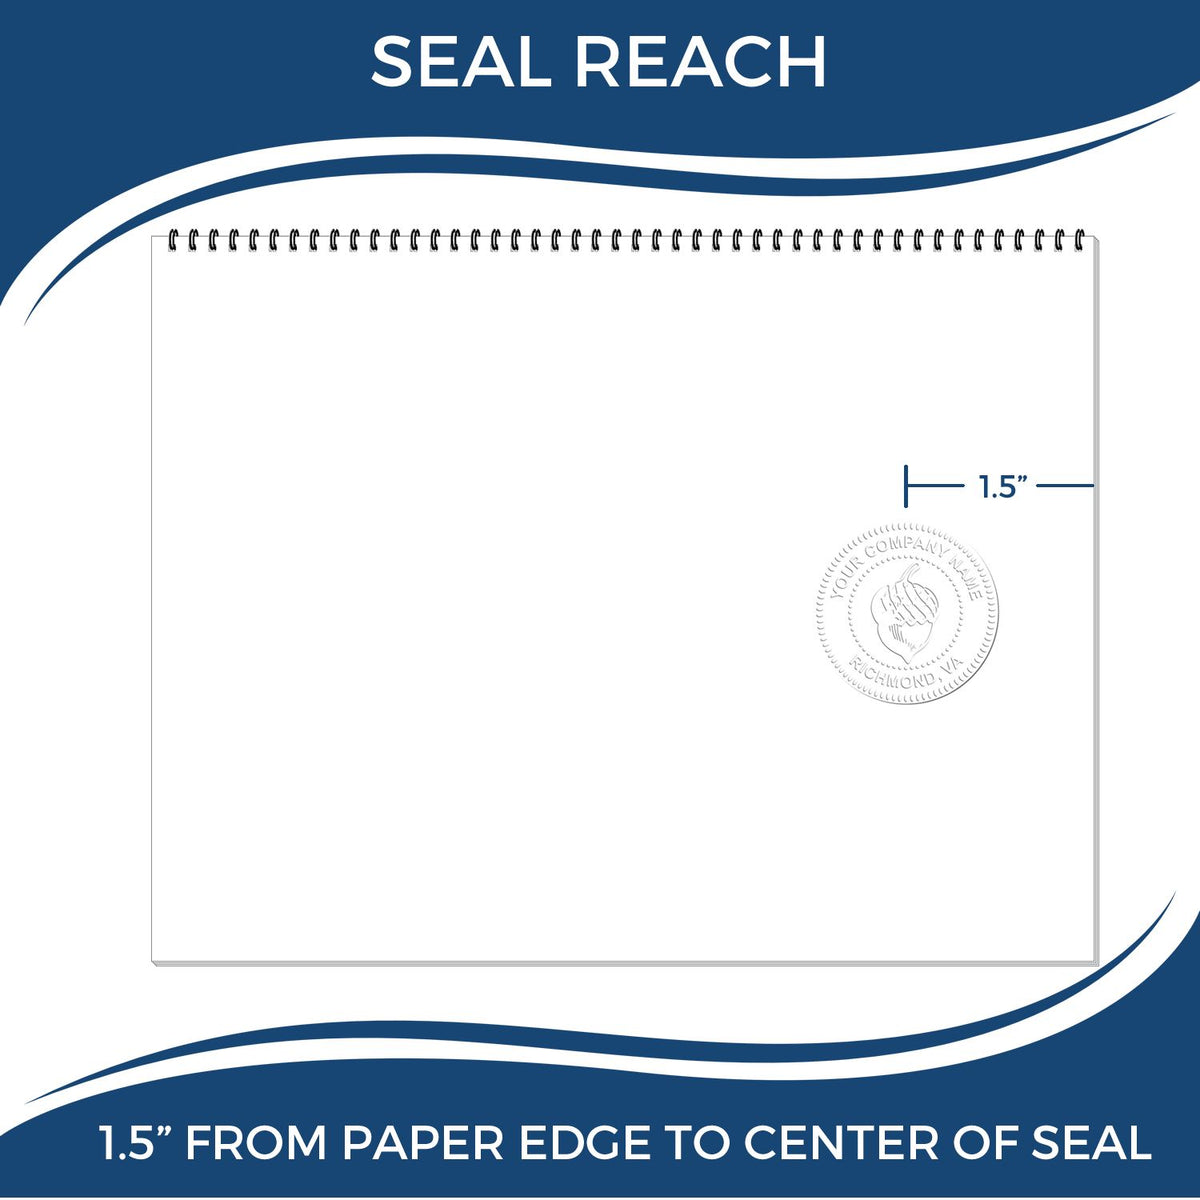 An infographic showing the seal reach which is represented by a ruler and a miniature seal image of the Hybrid Missouri Landscape Architect Seal